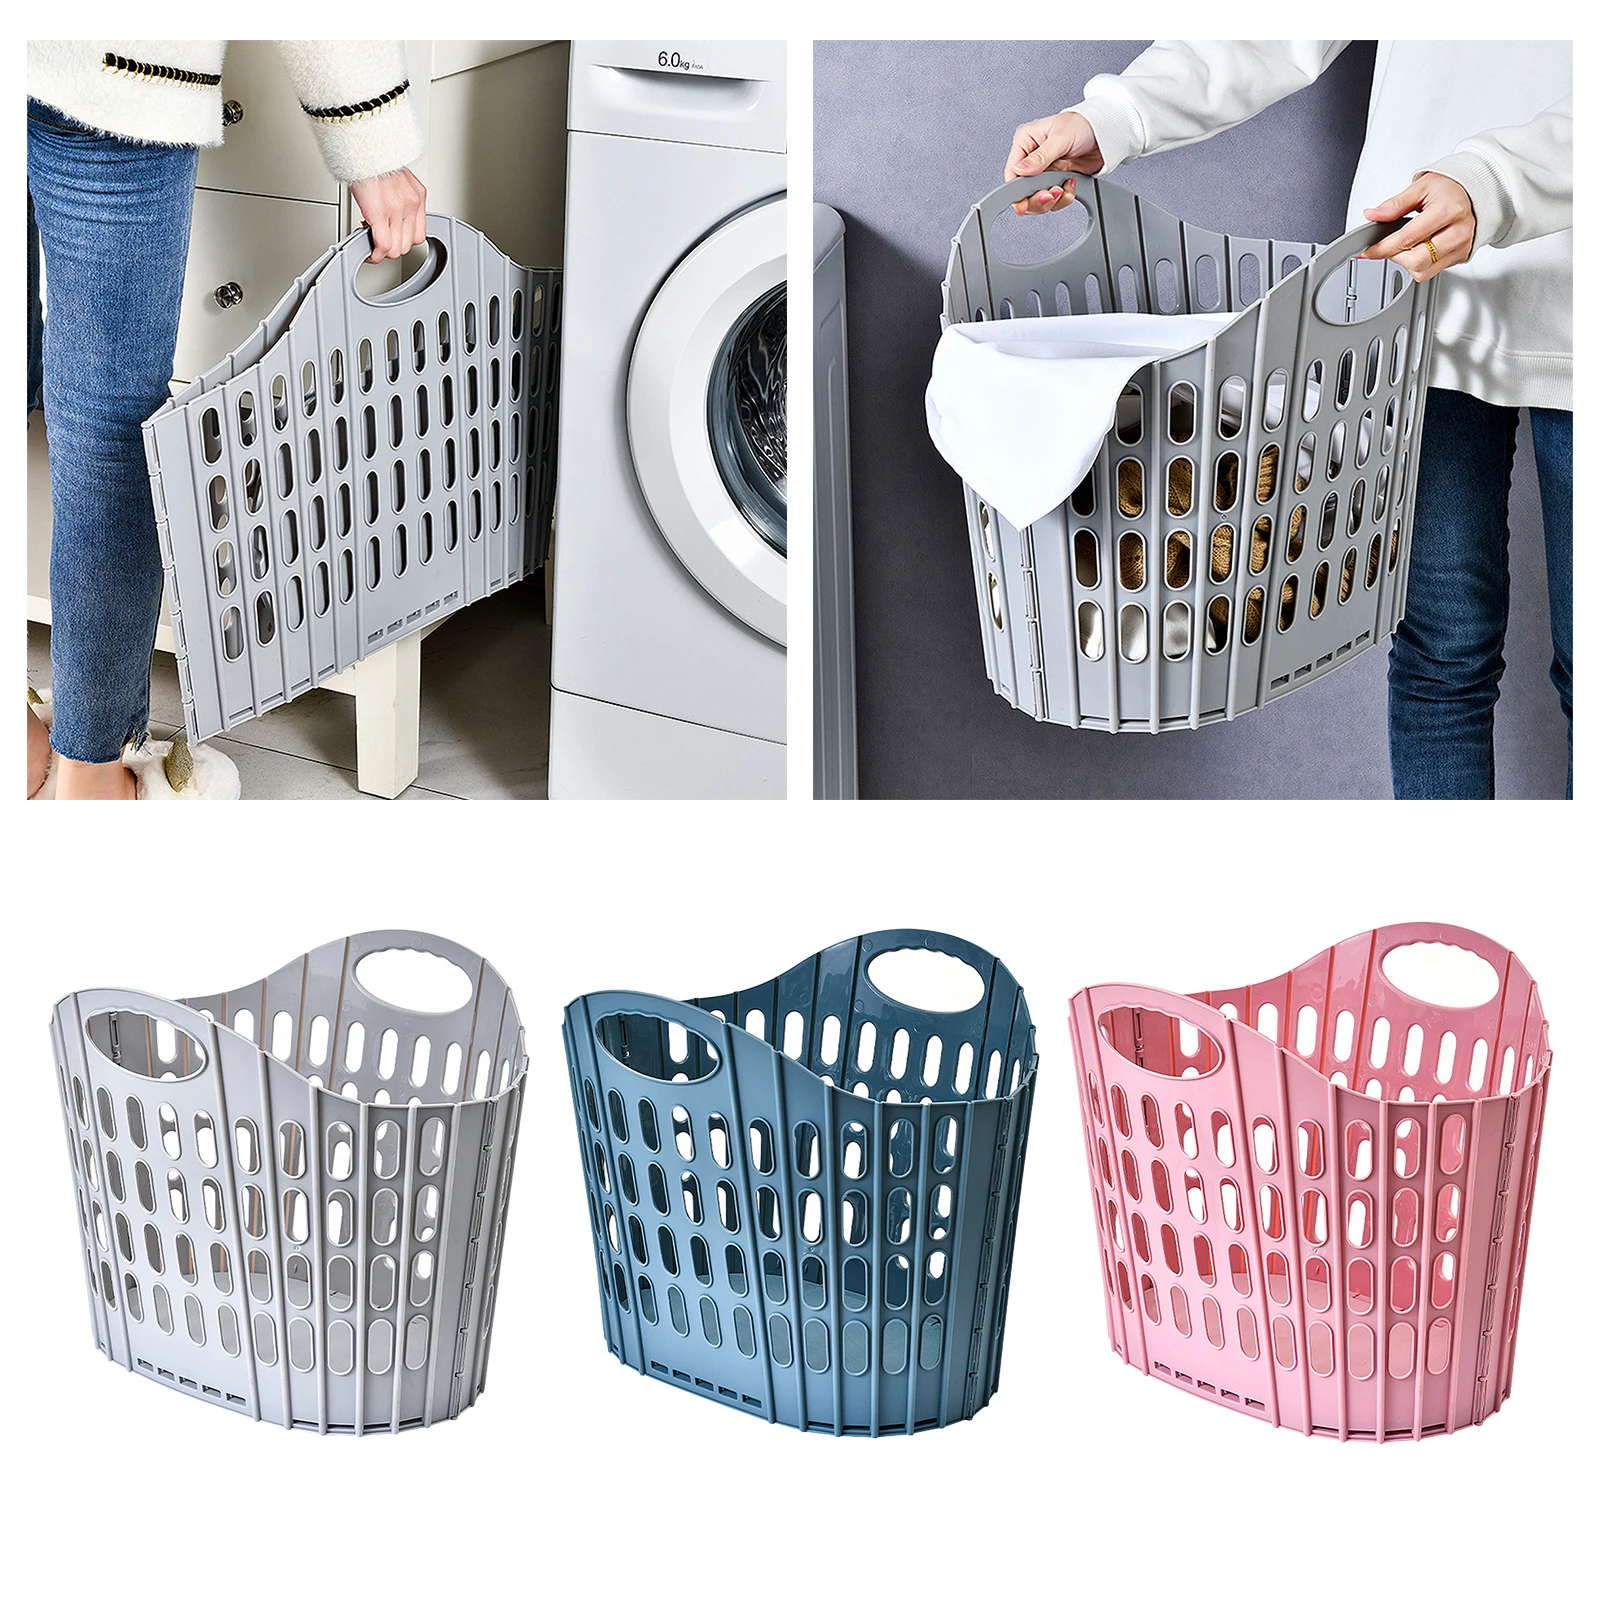 Yellow Duck + Cactus Viyuse 2pcs Storage Baskets Foldable Laundry Hamper Waterproof Organization Bins Collapsible Laundry Baskets Small Organizer for Bedroom Dirty Clothes Home and Office Toy Box 